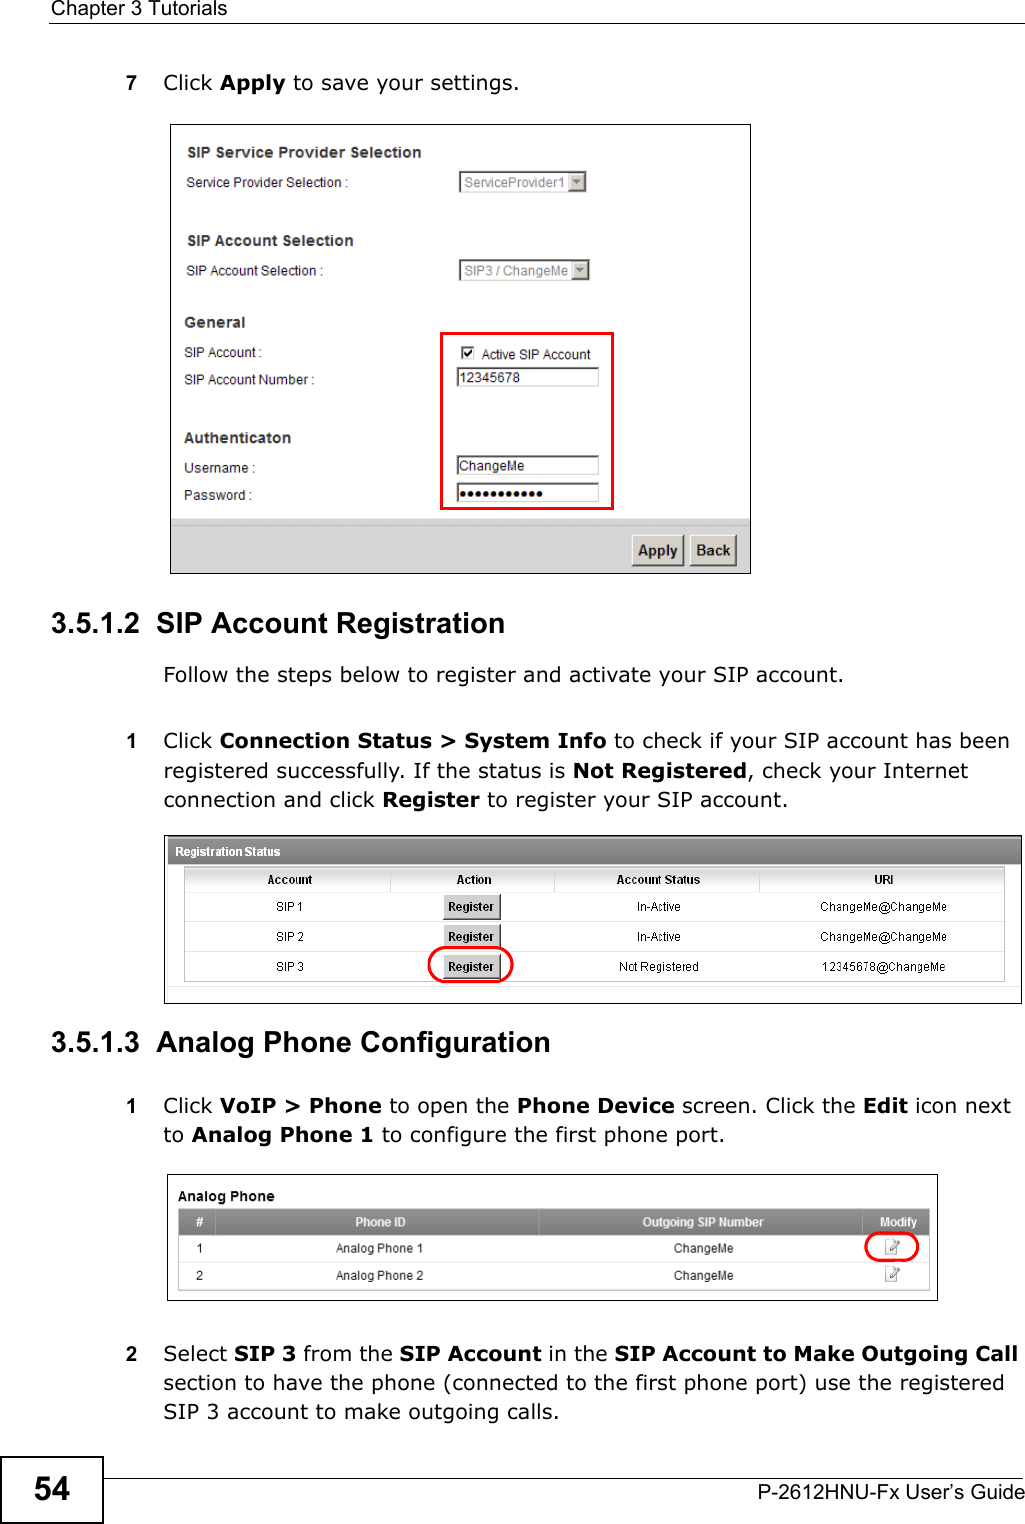 Chapter 3 TutorialsP-2612HNU-Fx User’s Guide547Click Apply to save your settings.3.5.1.2  SIP Account RegistrationFollow the steps below to register and activate your SIP account.1Click Connection Status &gt; System Info to check if your SIP account has beenregistered successfully. If the status is Not Registered, check your Internetconnection and click Register to register your SIP account.Tutorial: Registration Status3.5.1.3  Analog Phone Configuration1Click VoIP &gt; Phone to open the Phone Device screen. Click the Edit icon next to Analog Phone 1 to configure the first phone port.2Select SIP 3 from the SIP Account in the SIP Account to Make Outgoing Callsection to have the phone (connected to the first phone port) use the registered SIP 3 account to make outgoing calls.